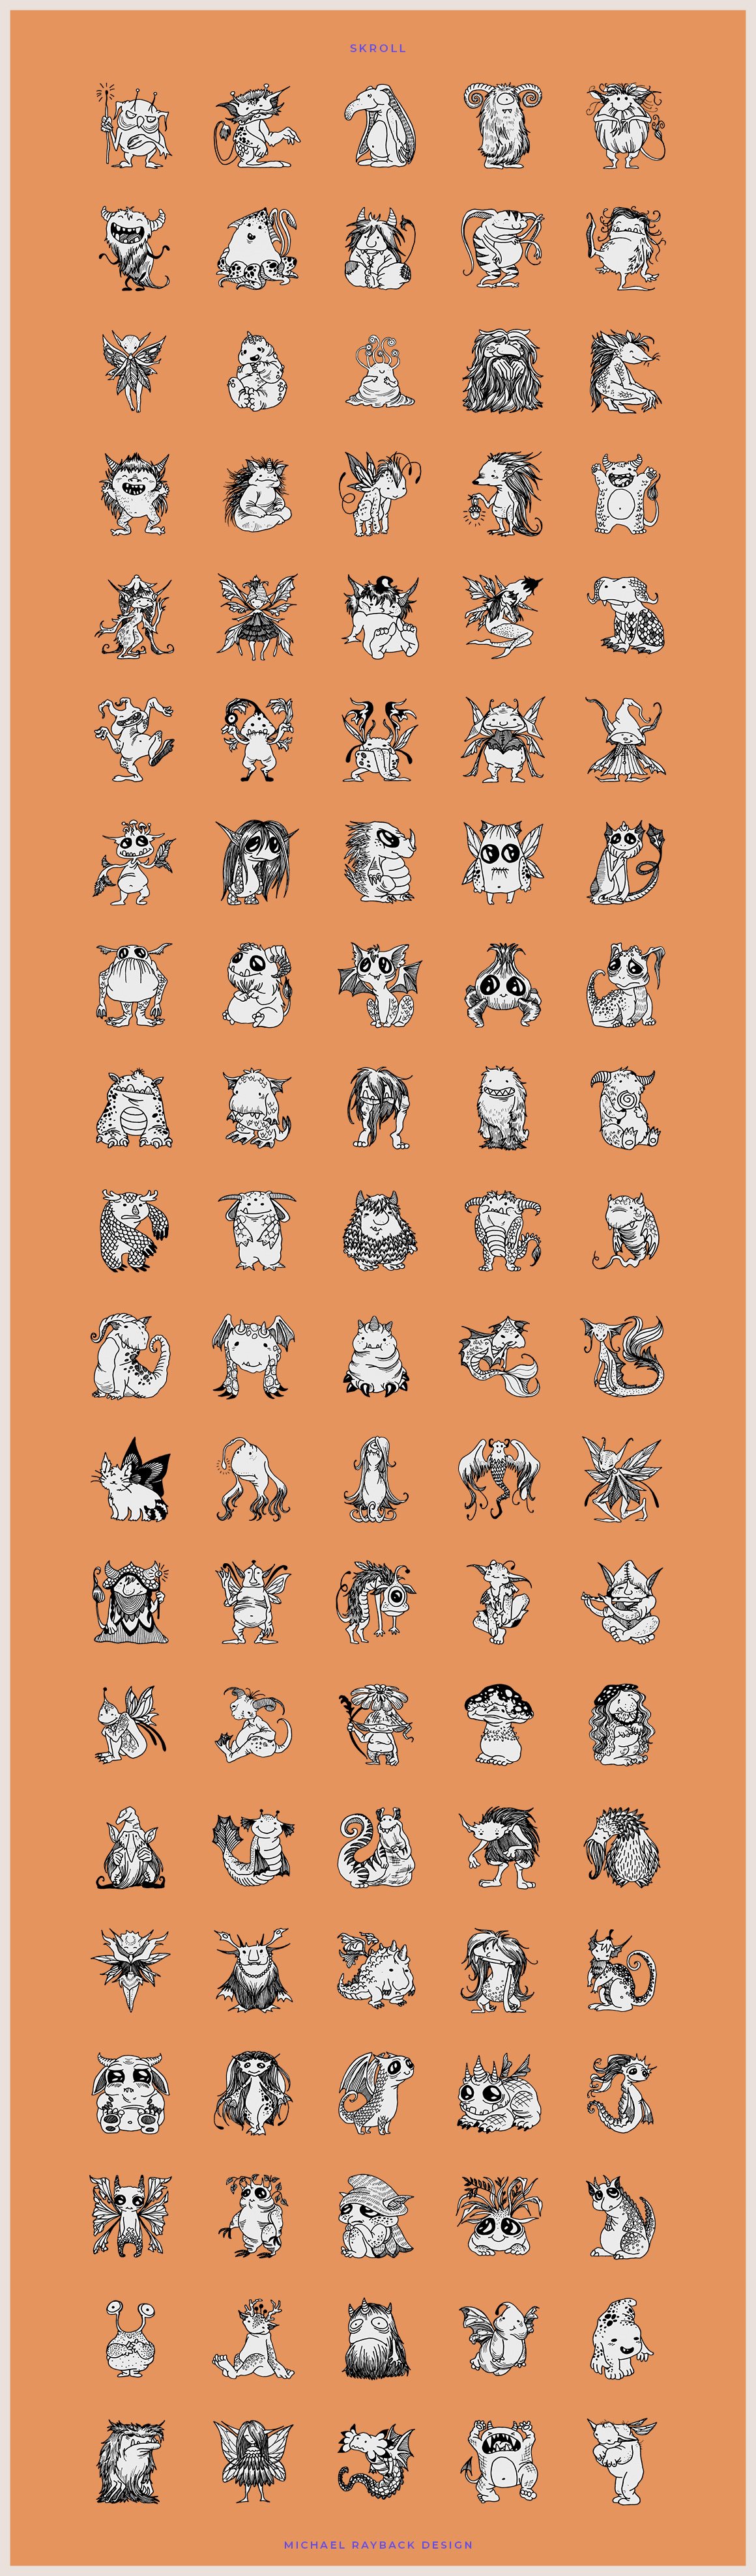 100 Hand Drawn Elements - Creatures